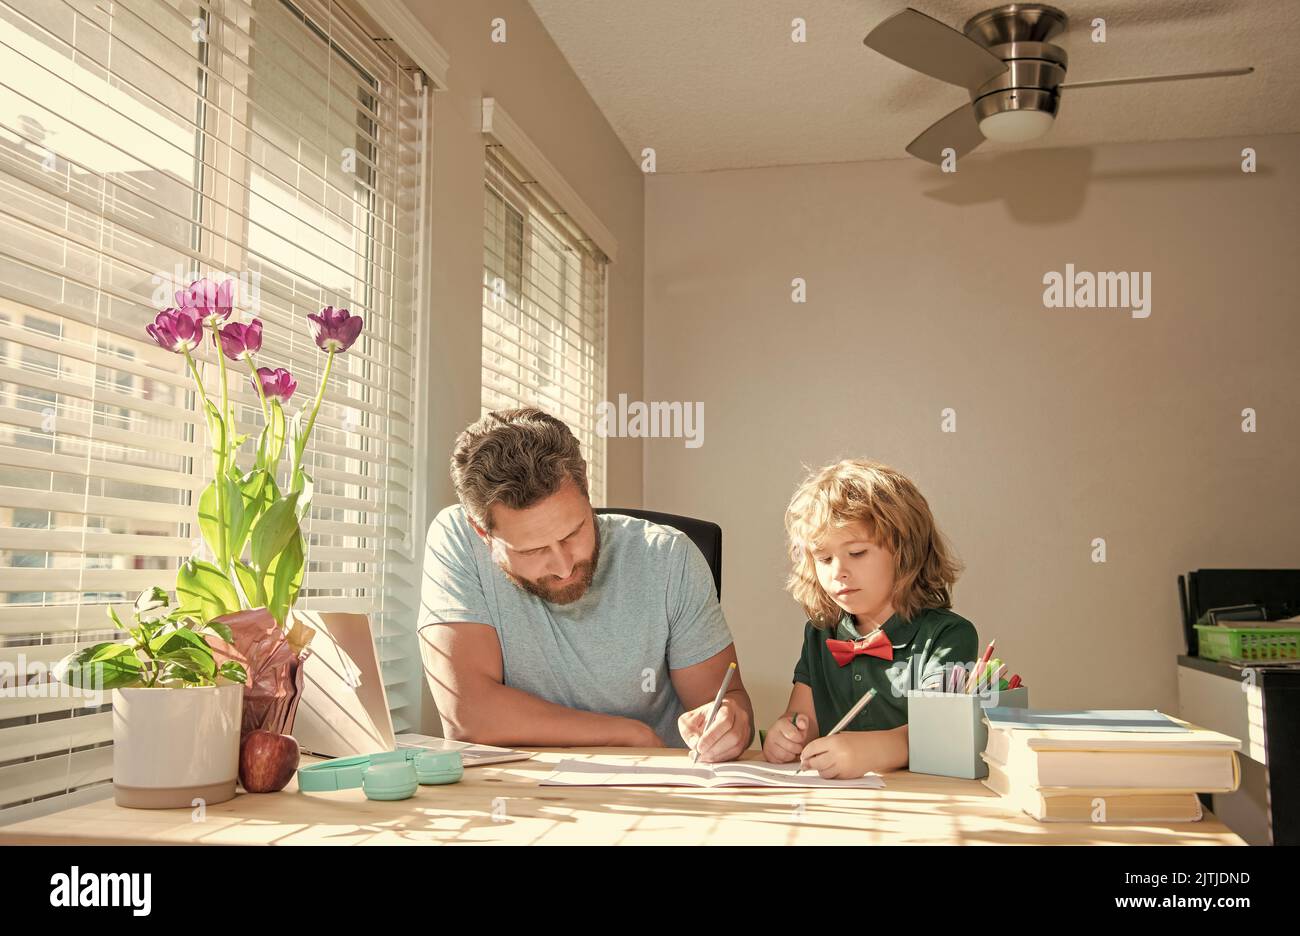 concentrated boy study with teacher. private drawing lesson. education concept. Stock Photo